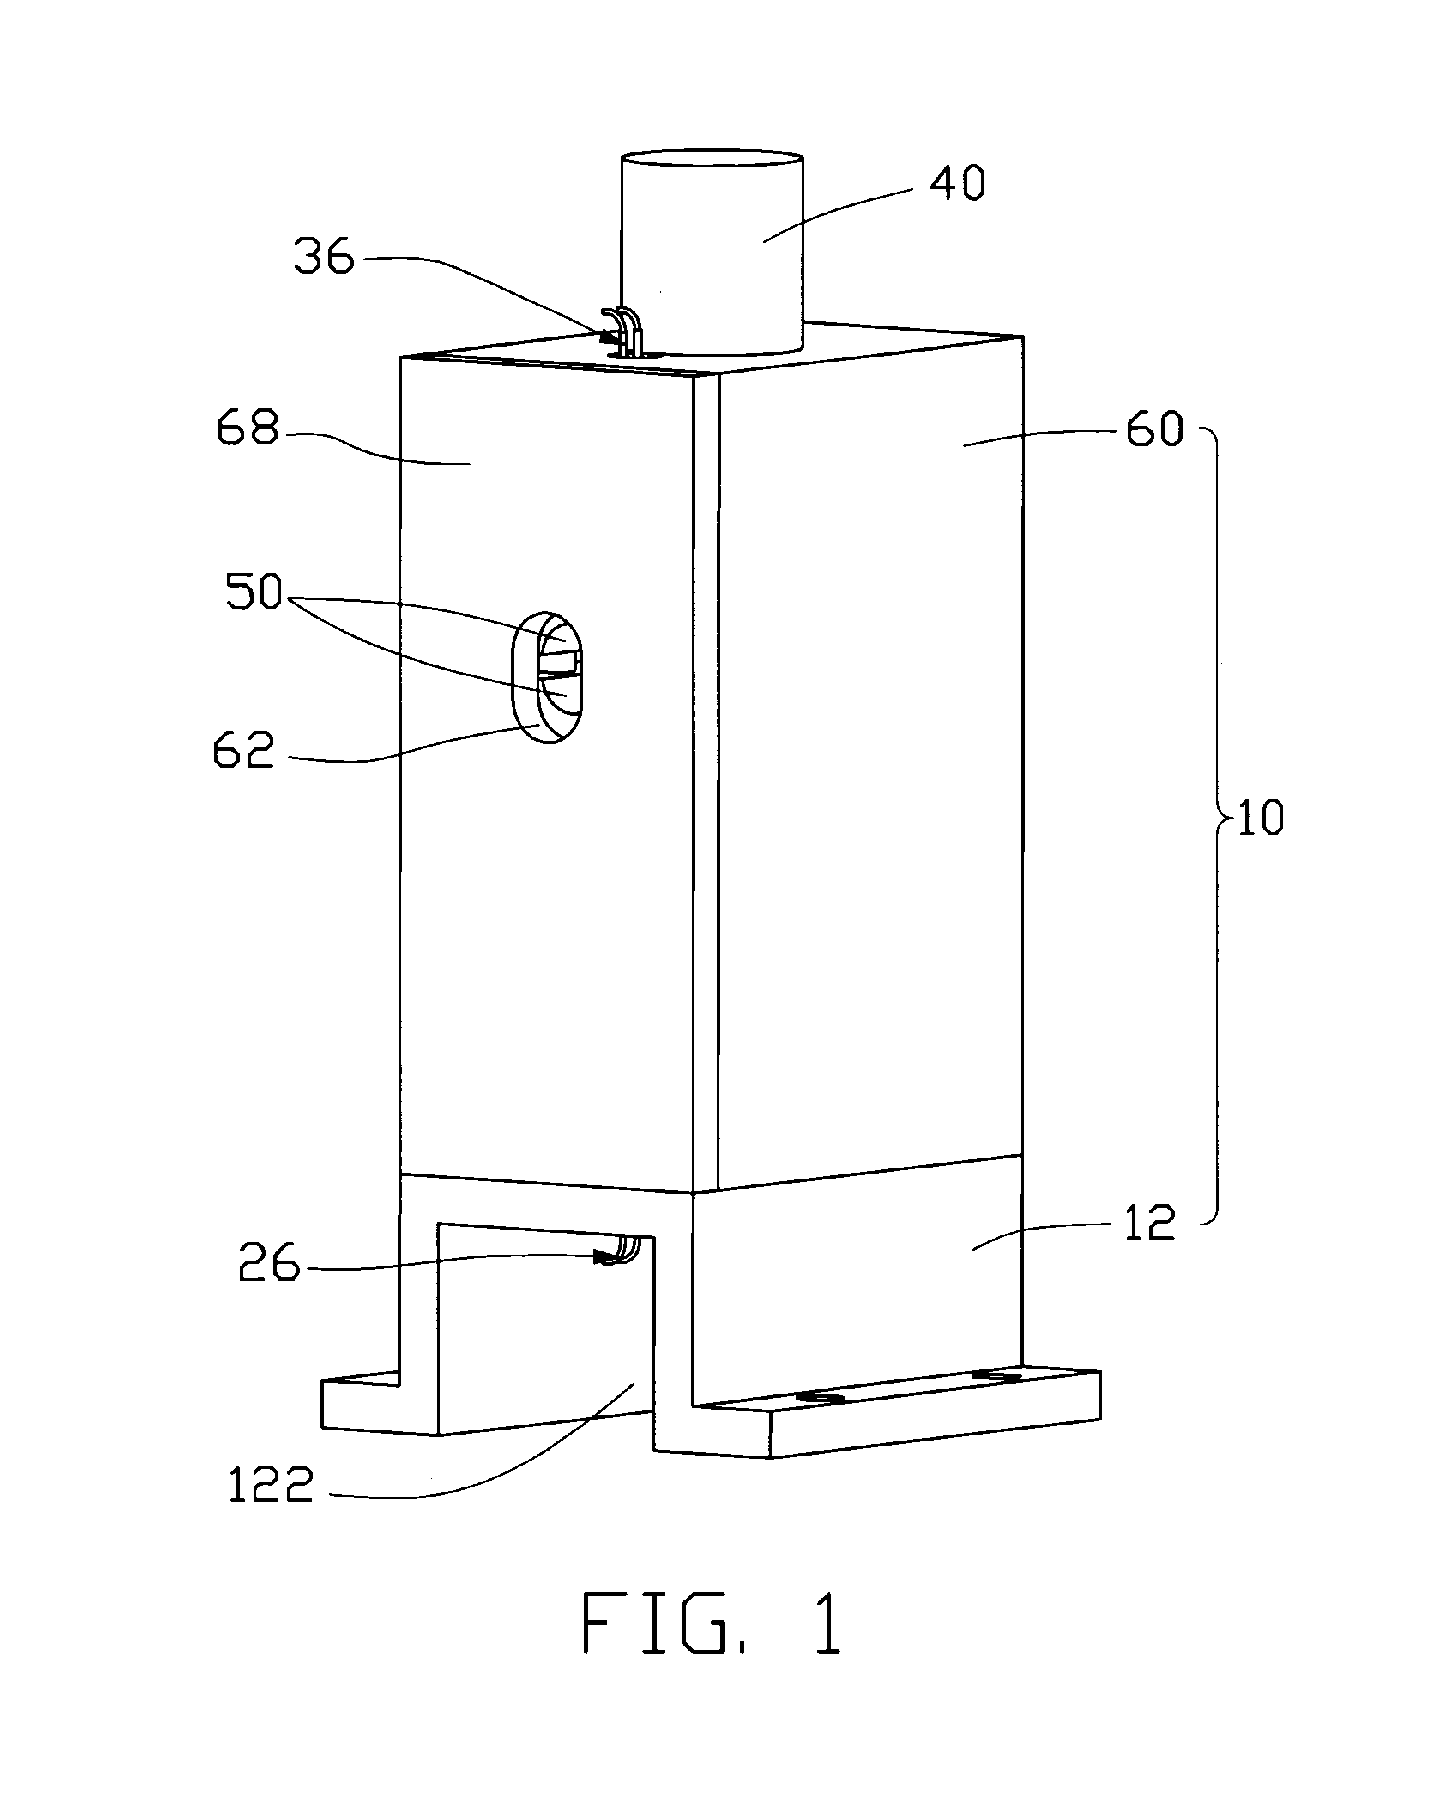 Performance testing apparatus for heat pipes